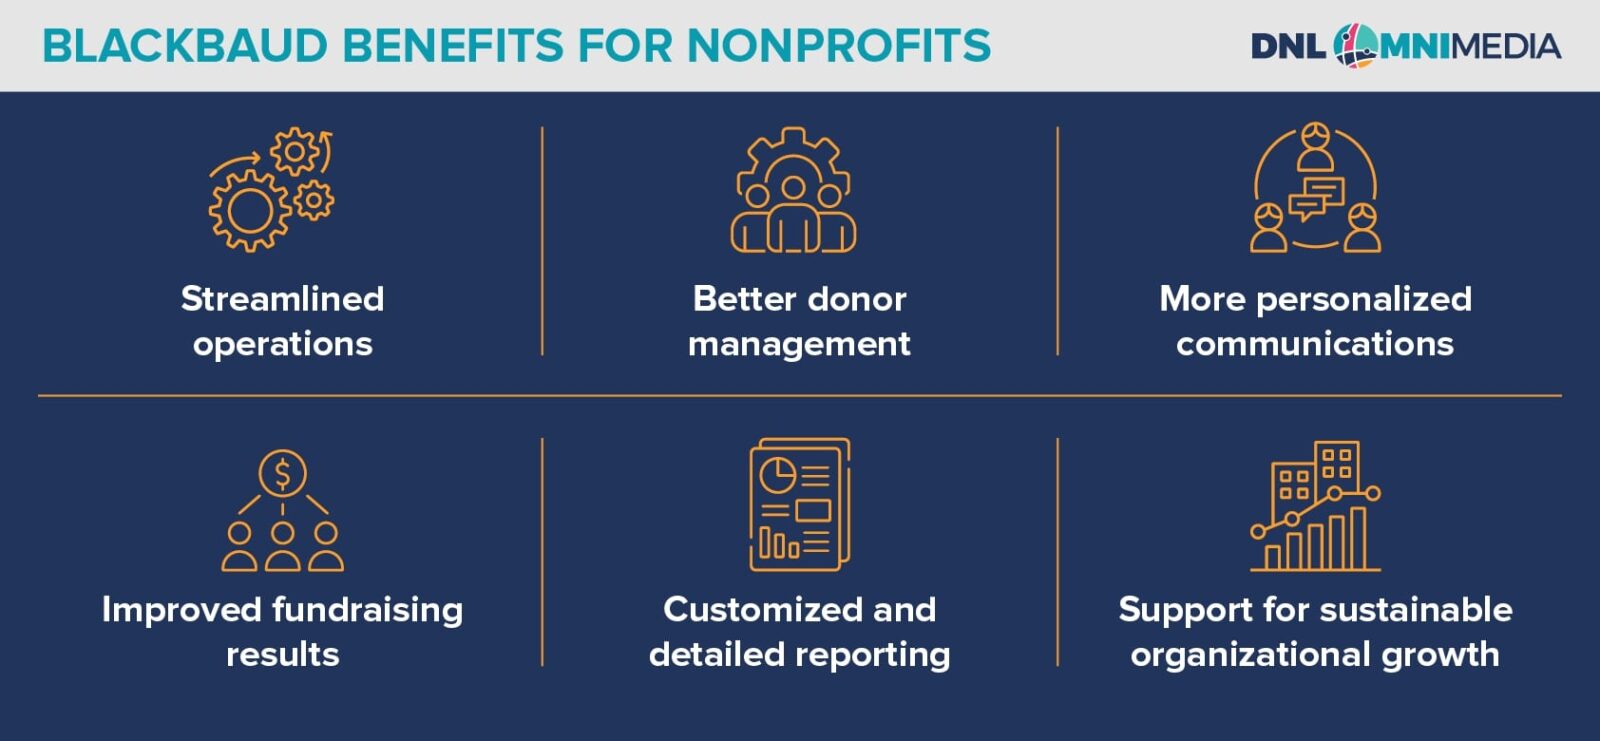 This image lists some of the benefits nonprofits get from using Blackbaud, all of which are explained in the text below.